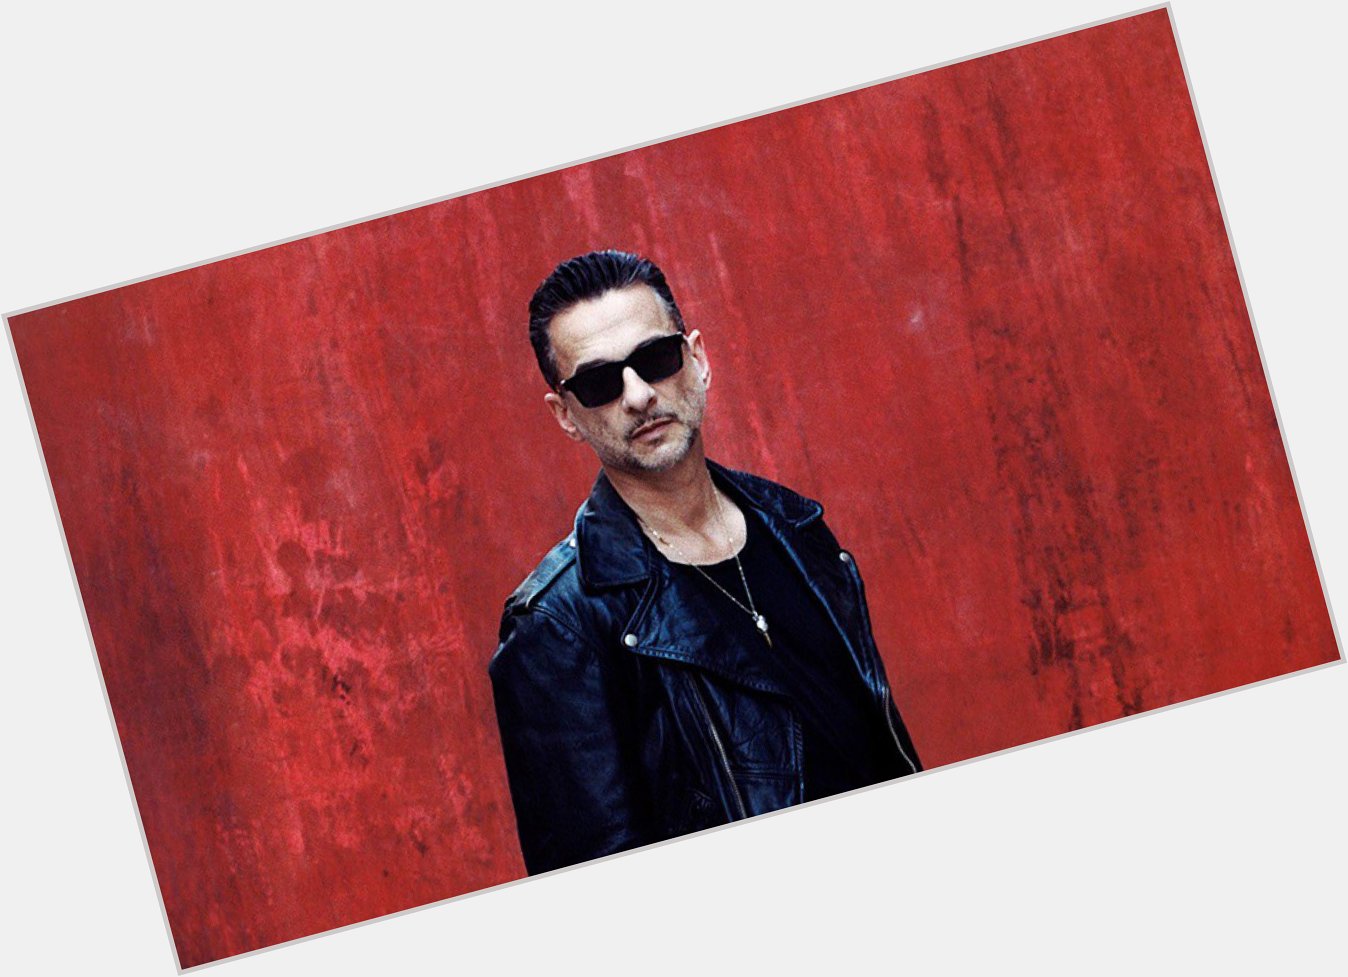 Happy birthday David Gahan of Depeche Mode!  What is your favorite Depeche Mode song? 